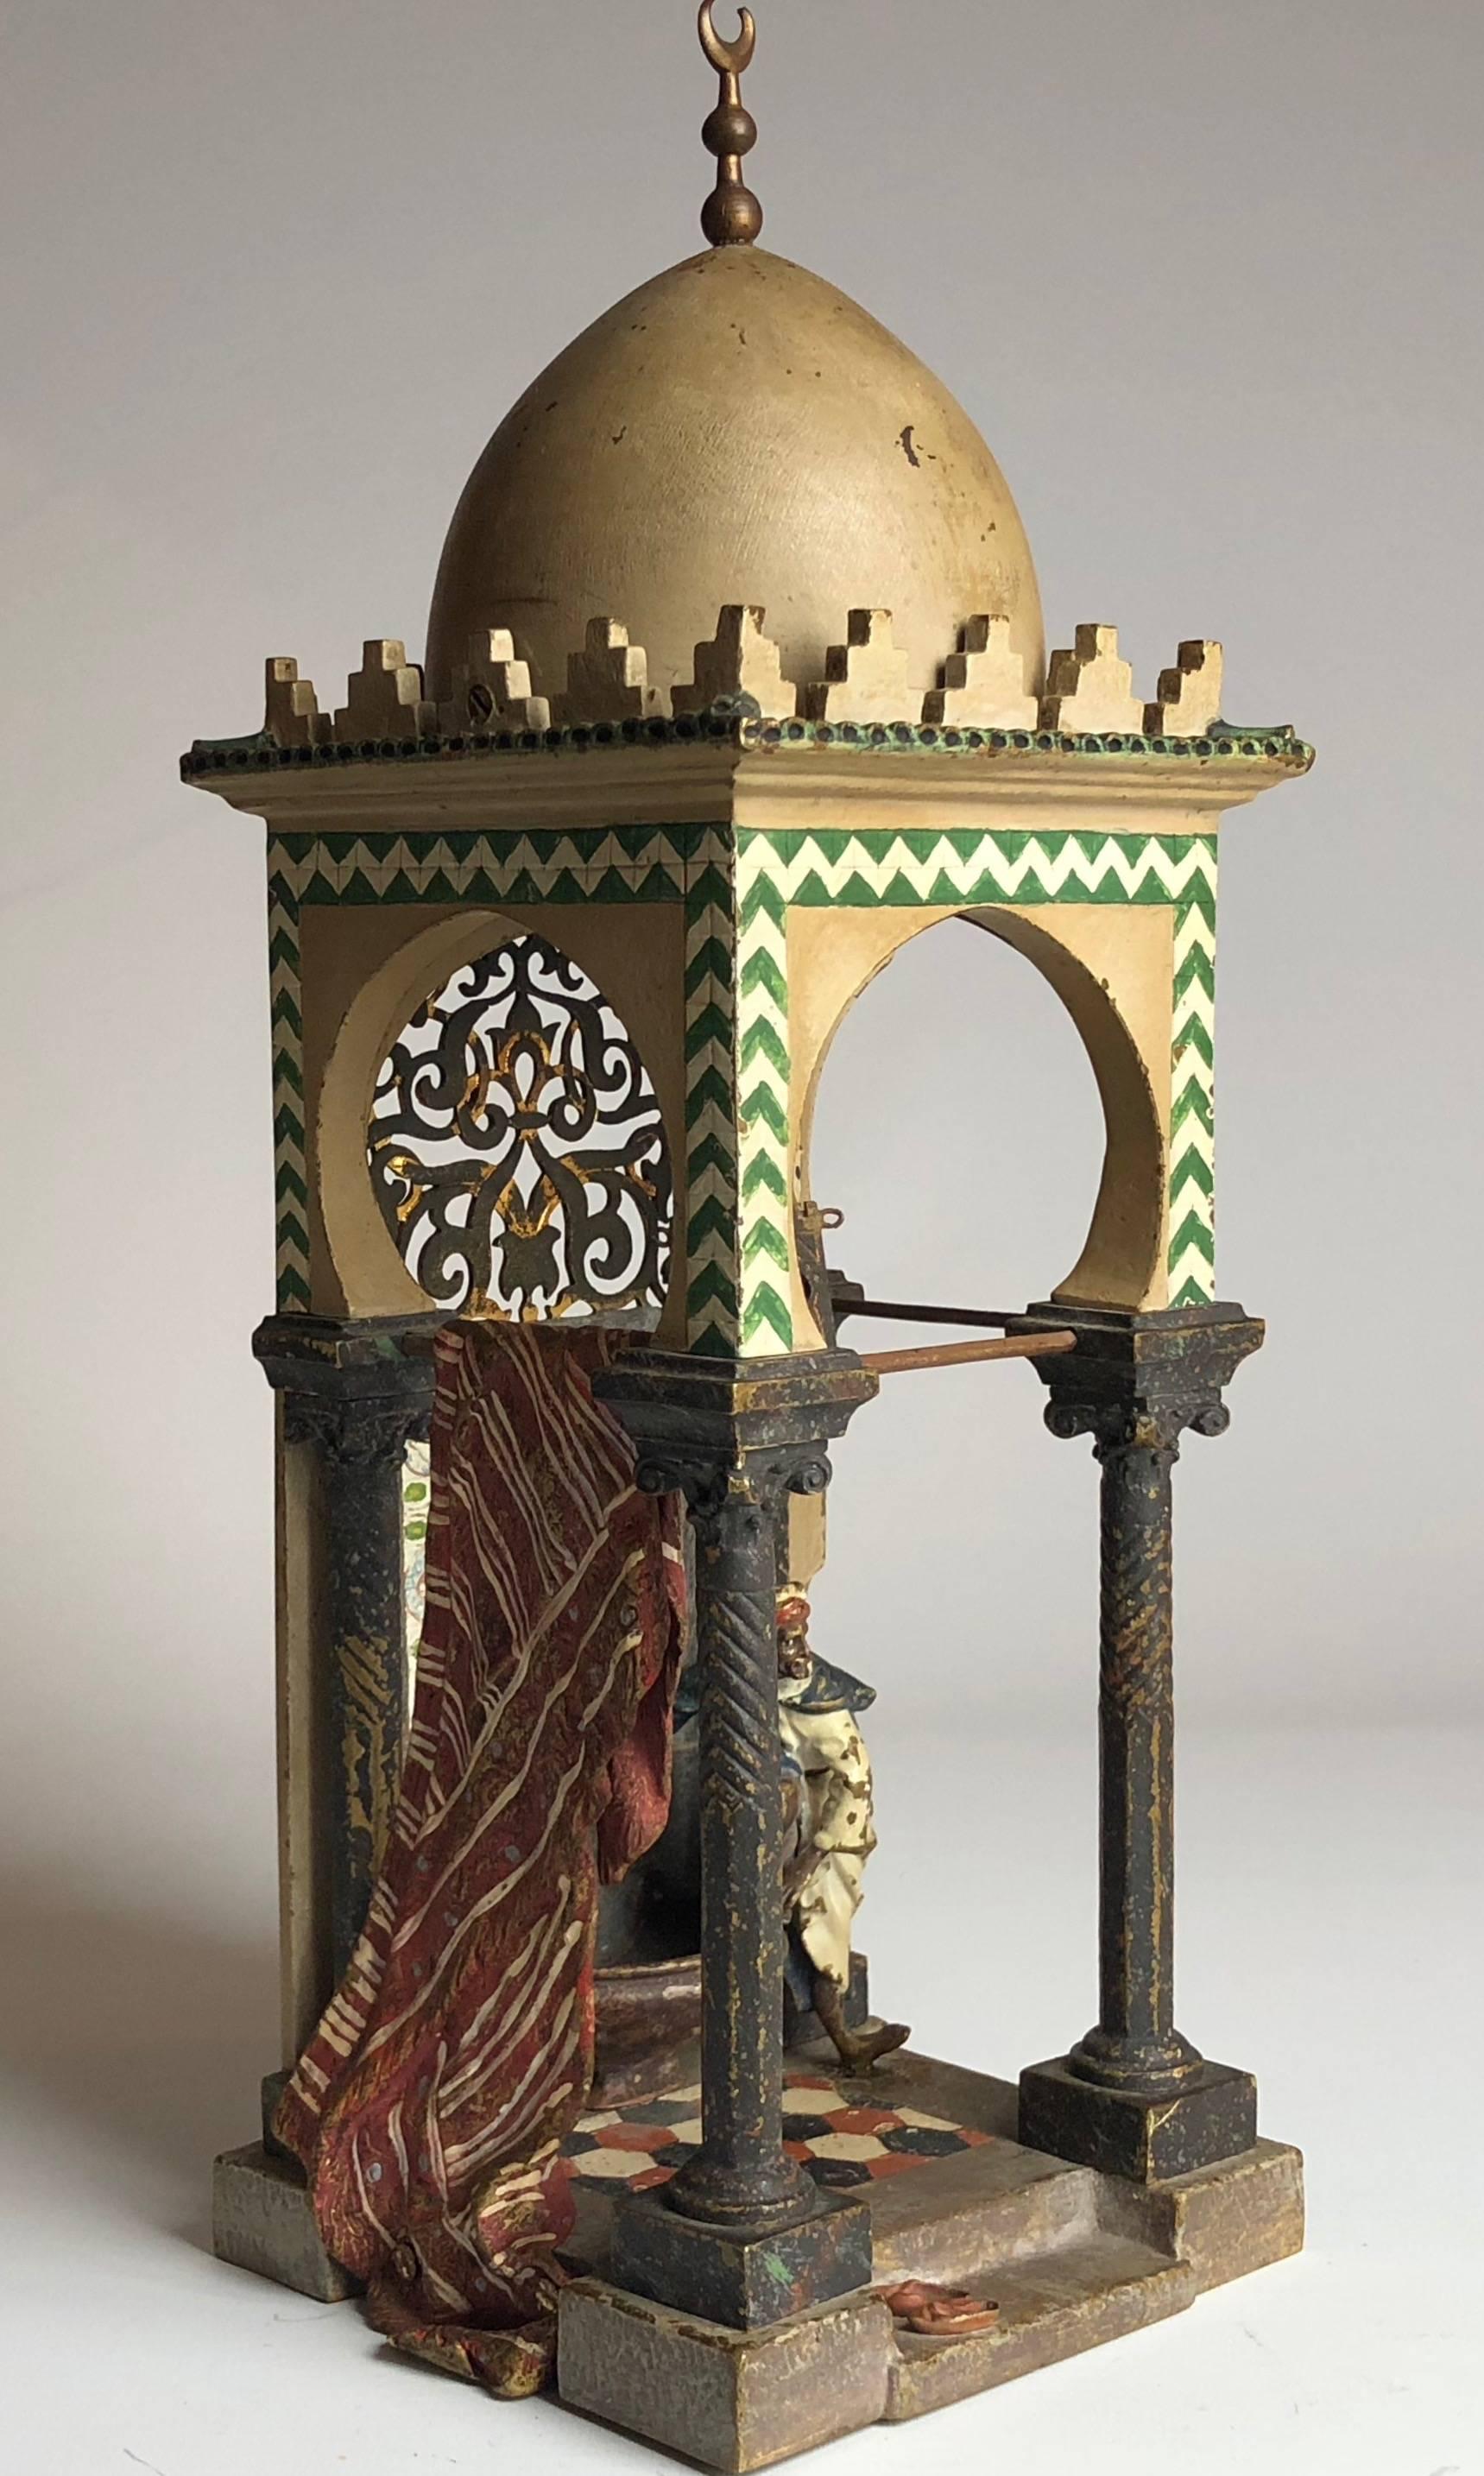 A fantastic and rare cold painted bronze lamp, nicely detailed mosque with foot washing basin and Muslim figure washing his feet. Crescent moon finial over domed top.

Marked to the base with the Bergman foundry mark.

Note: The lamp is not